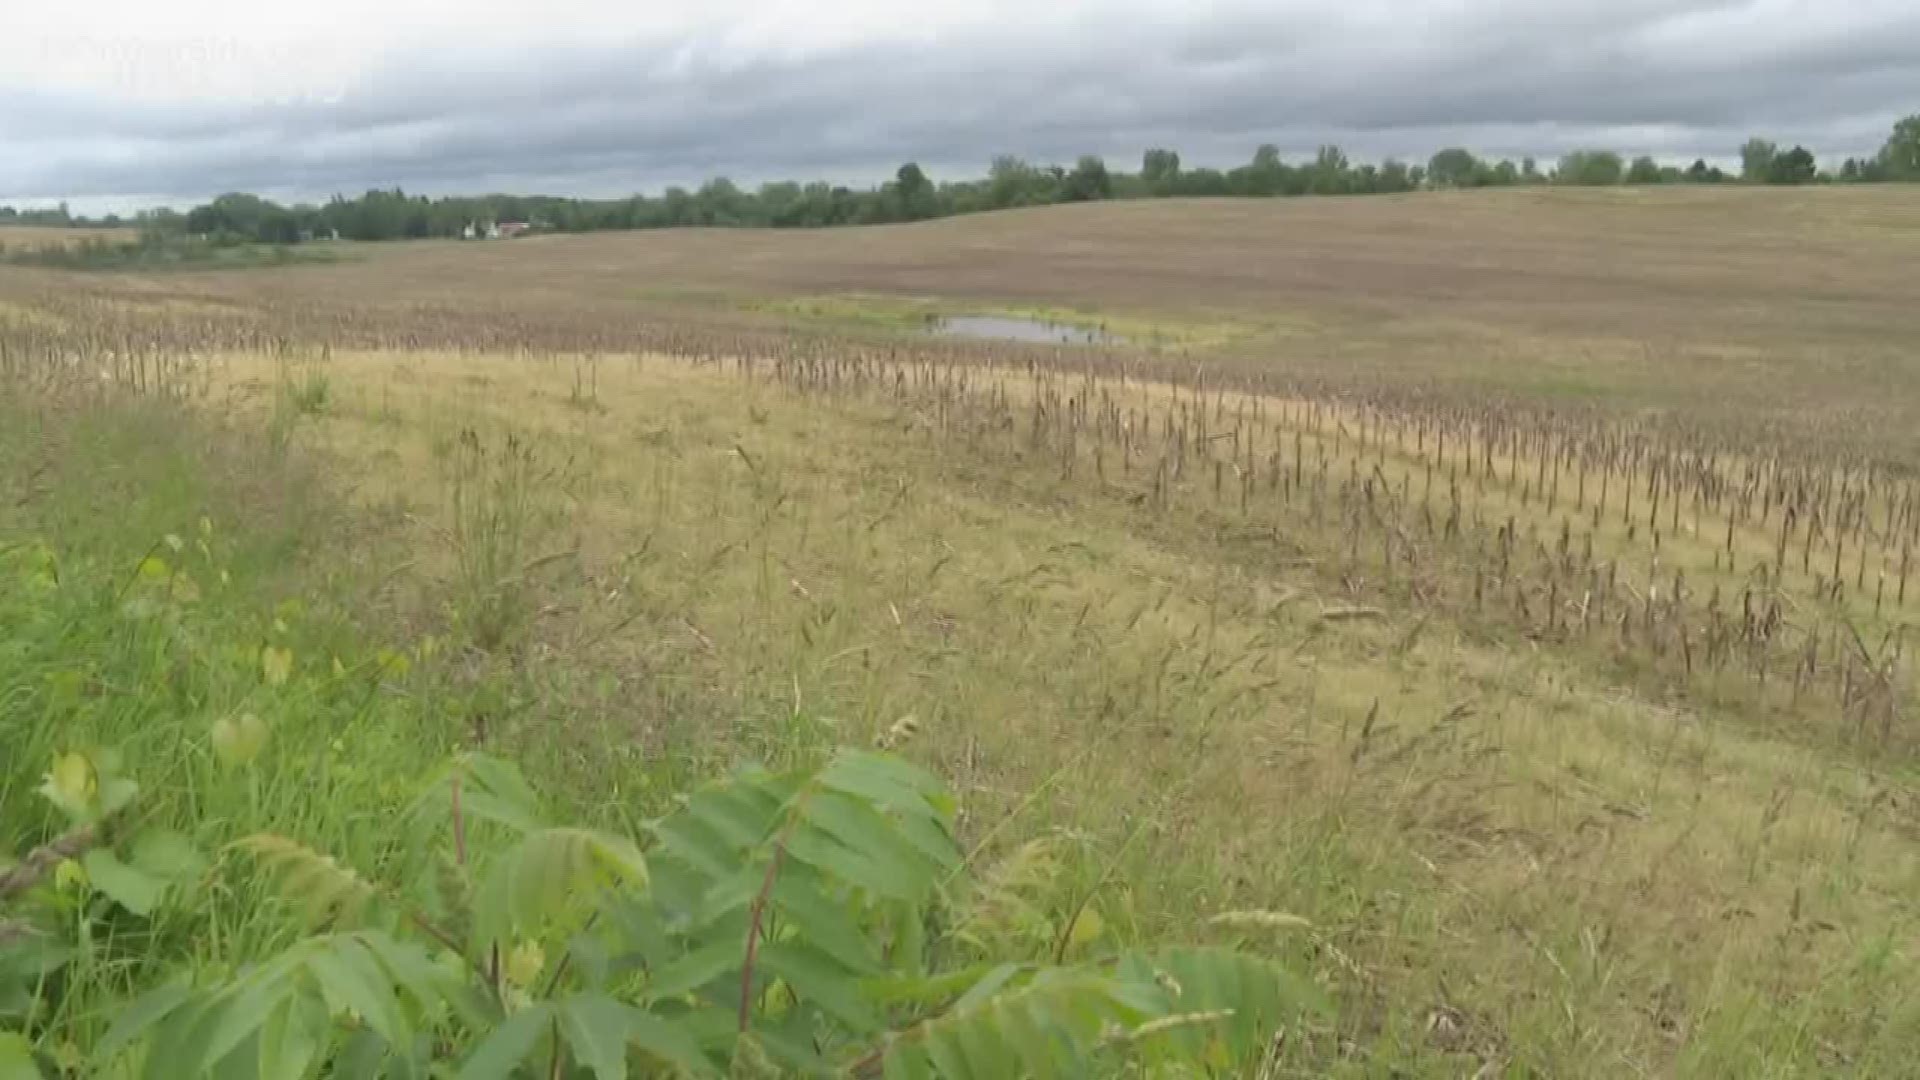 The wet spring has kept Michigan fields soggy, forcing farmers to wait or abandon planting for another year.